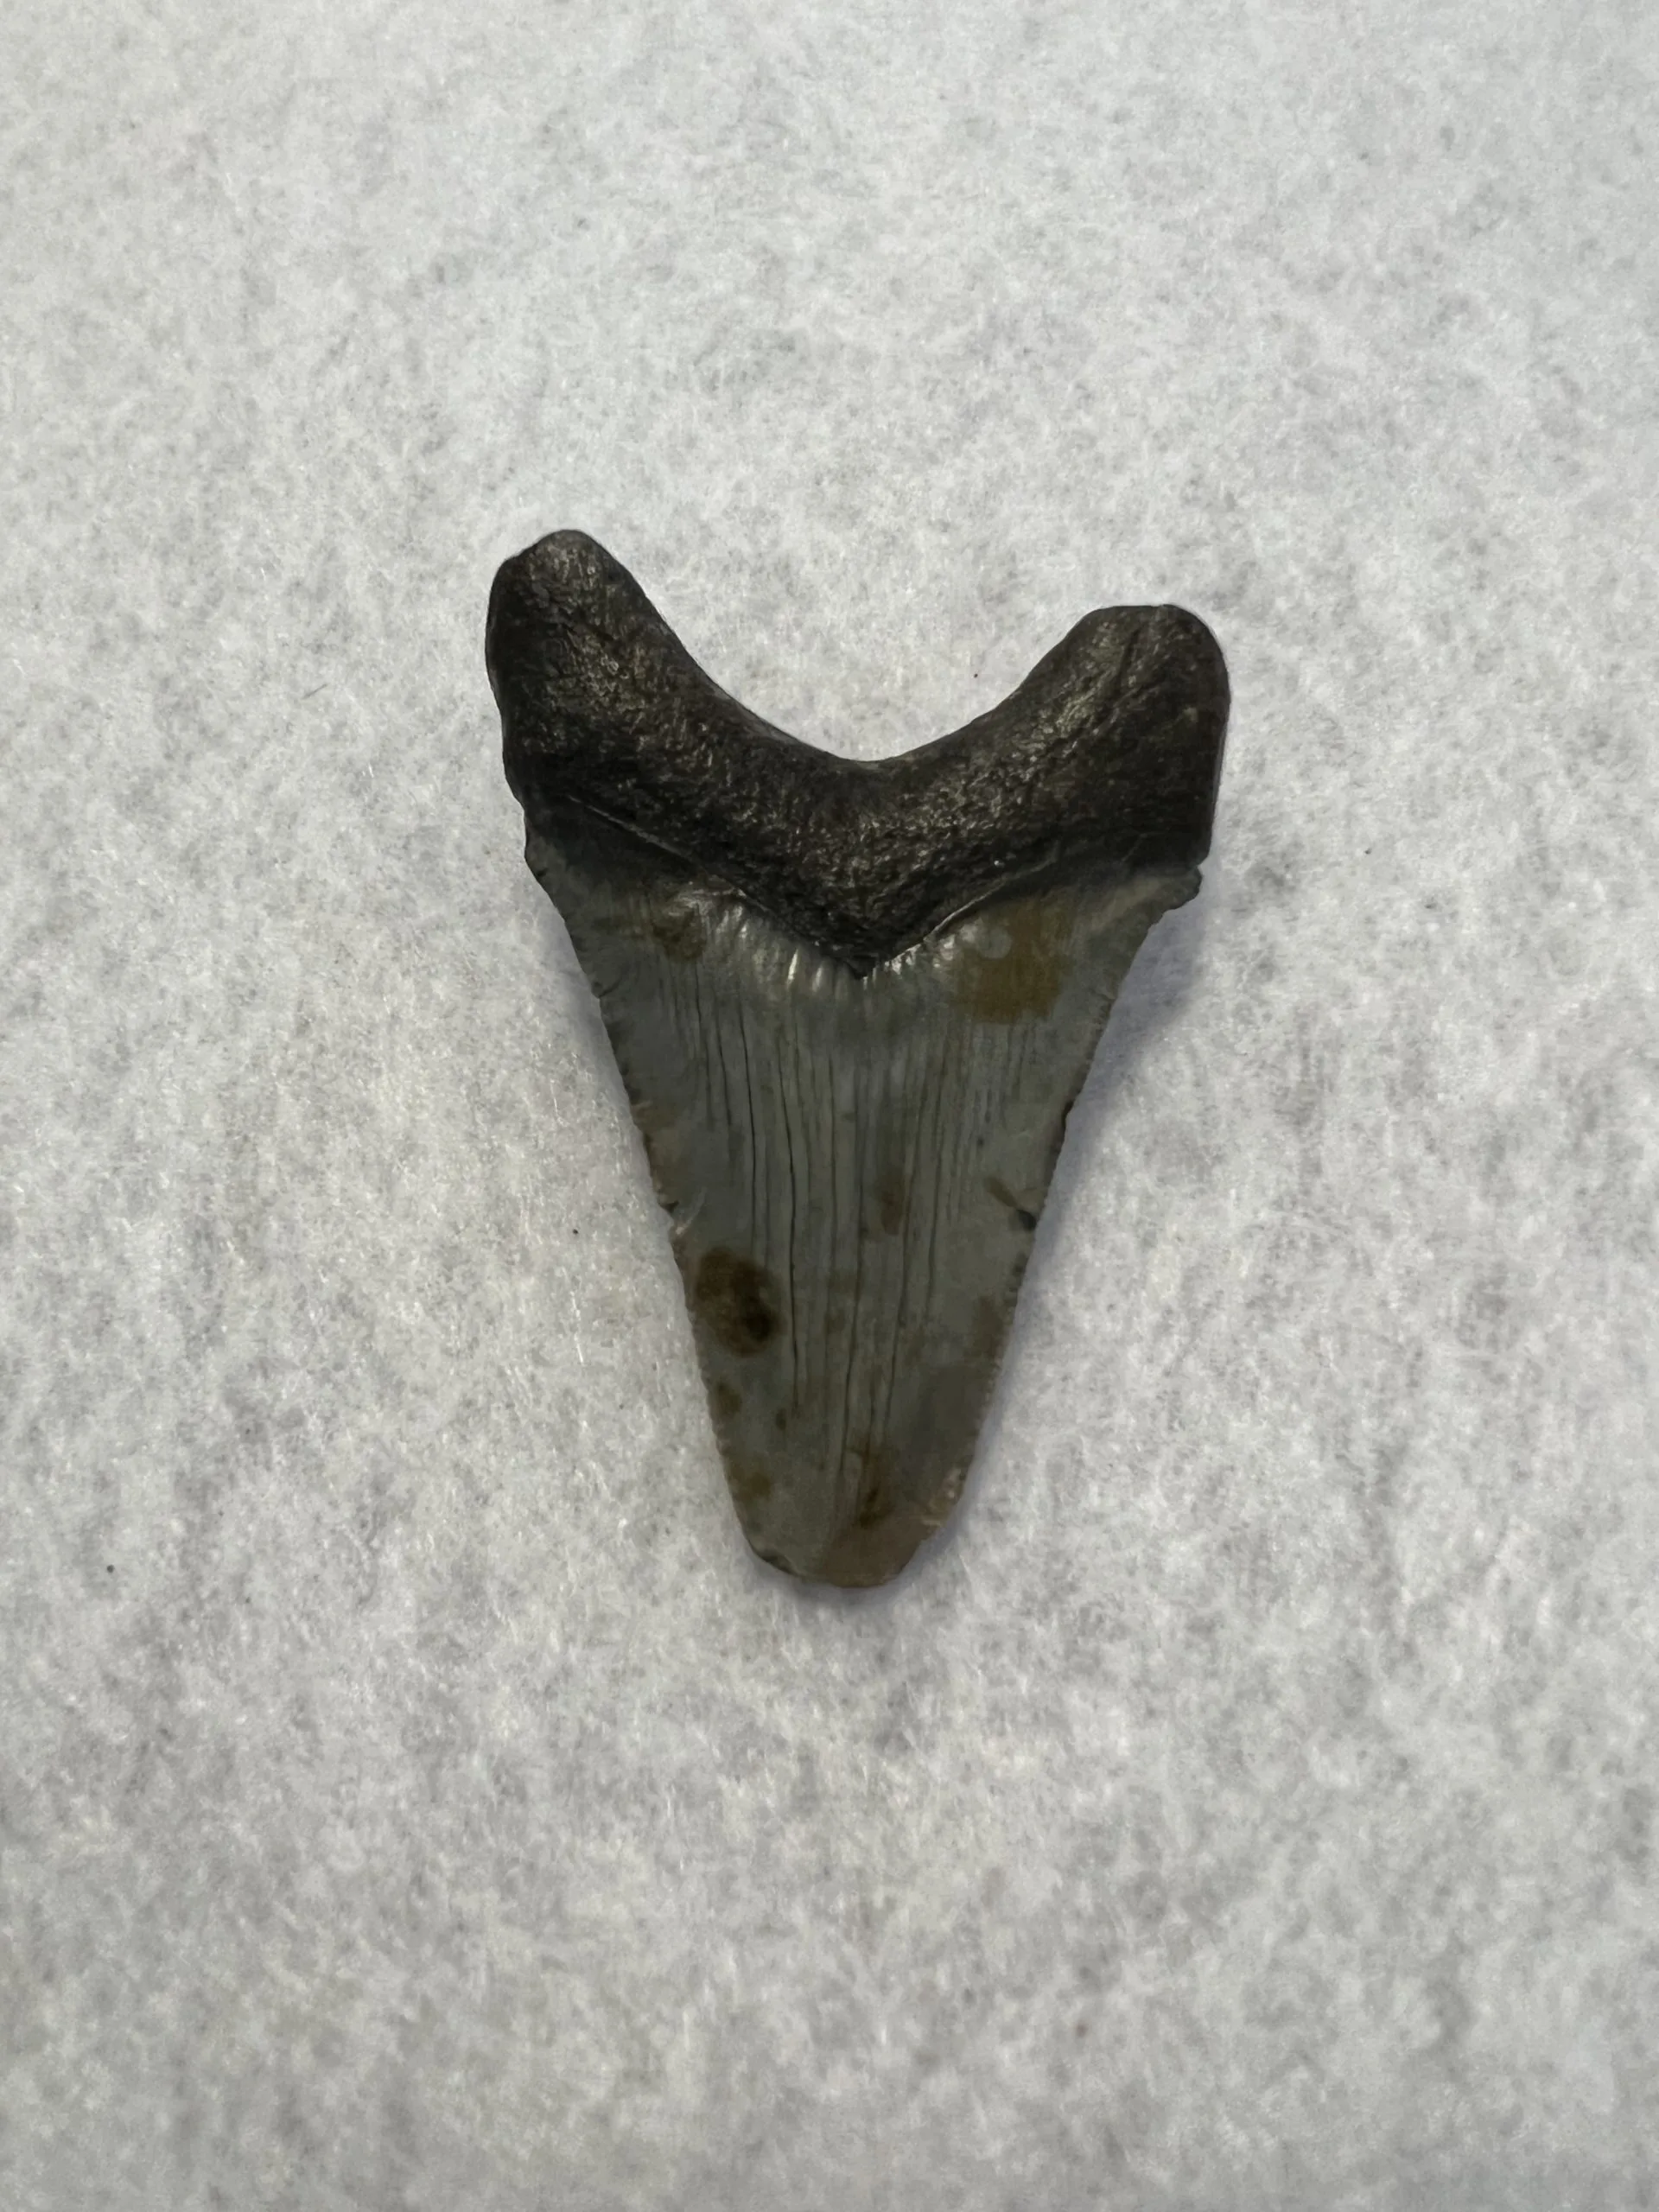 Megalodon Tooth South Carolina 2.50 inch Prehistoric Online